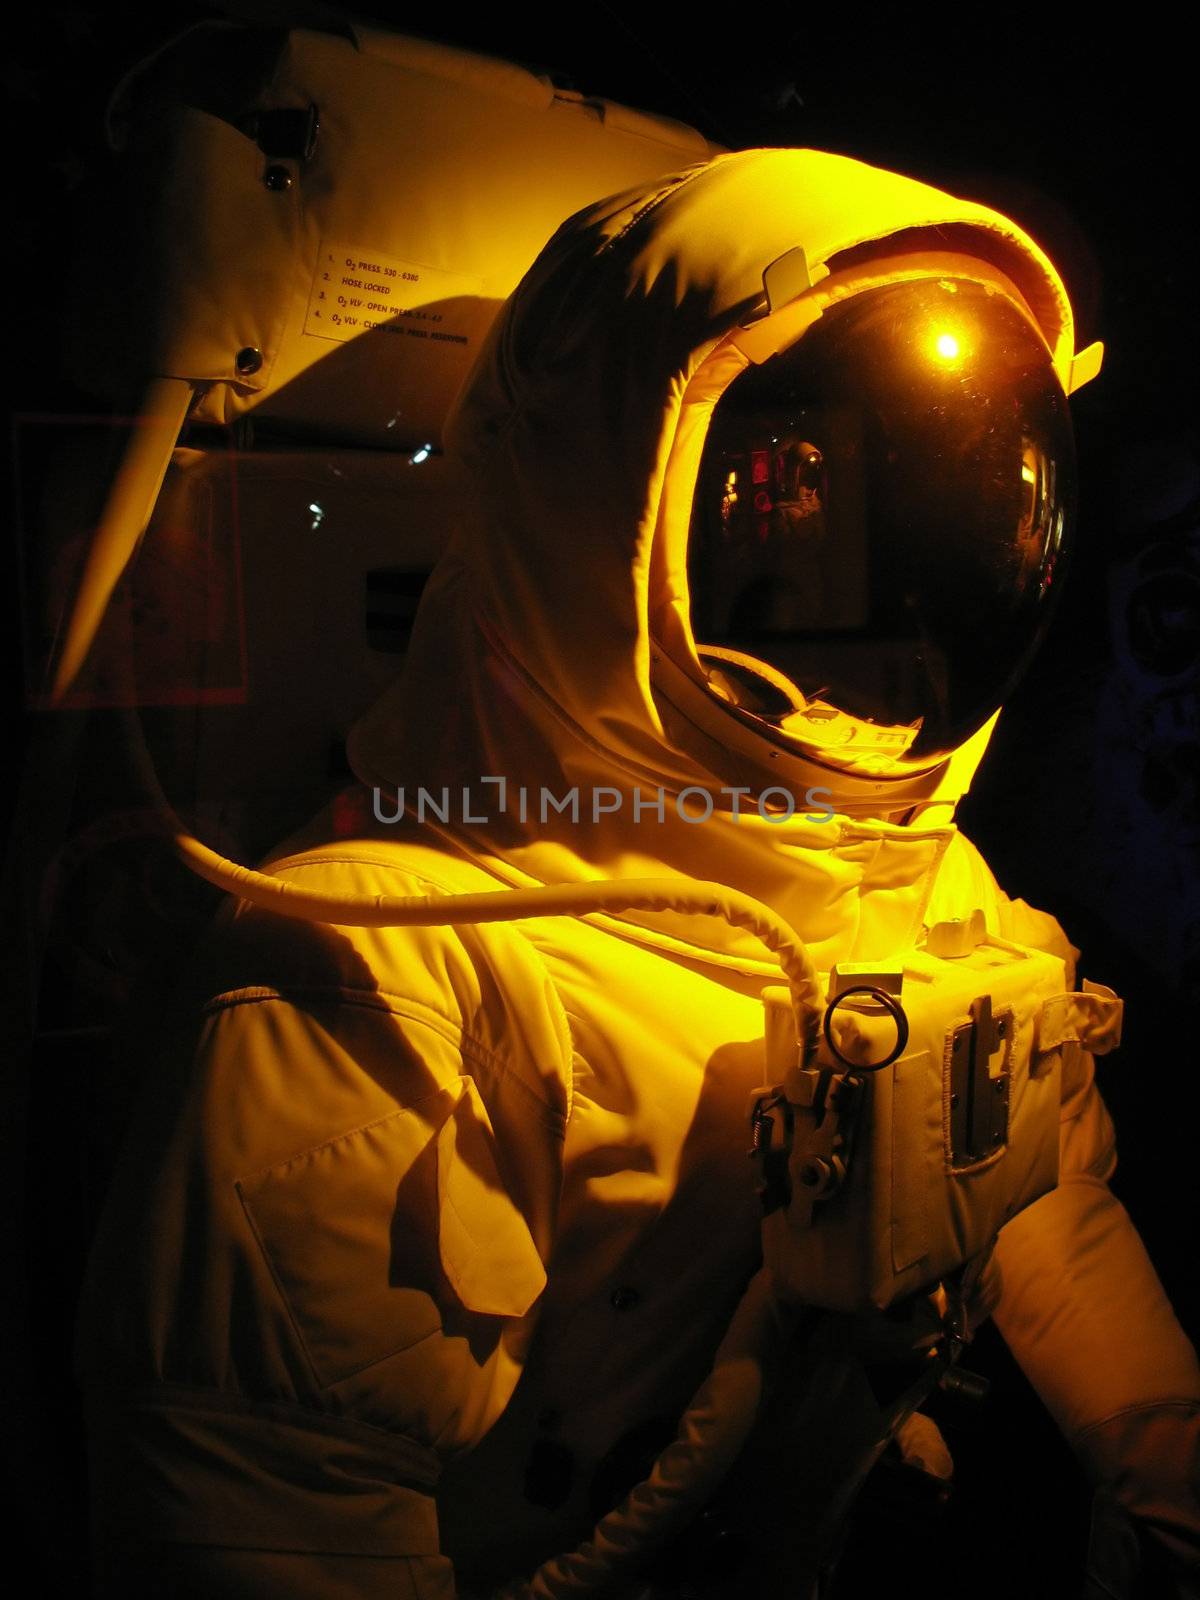 A complete astronaut setup under dramatic lighting.  